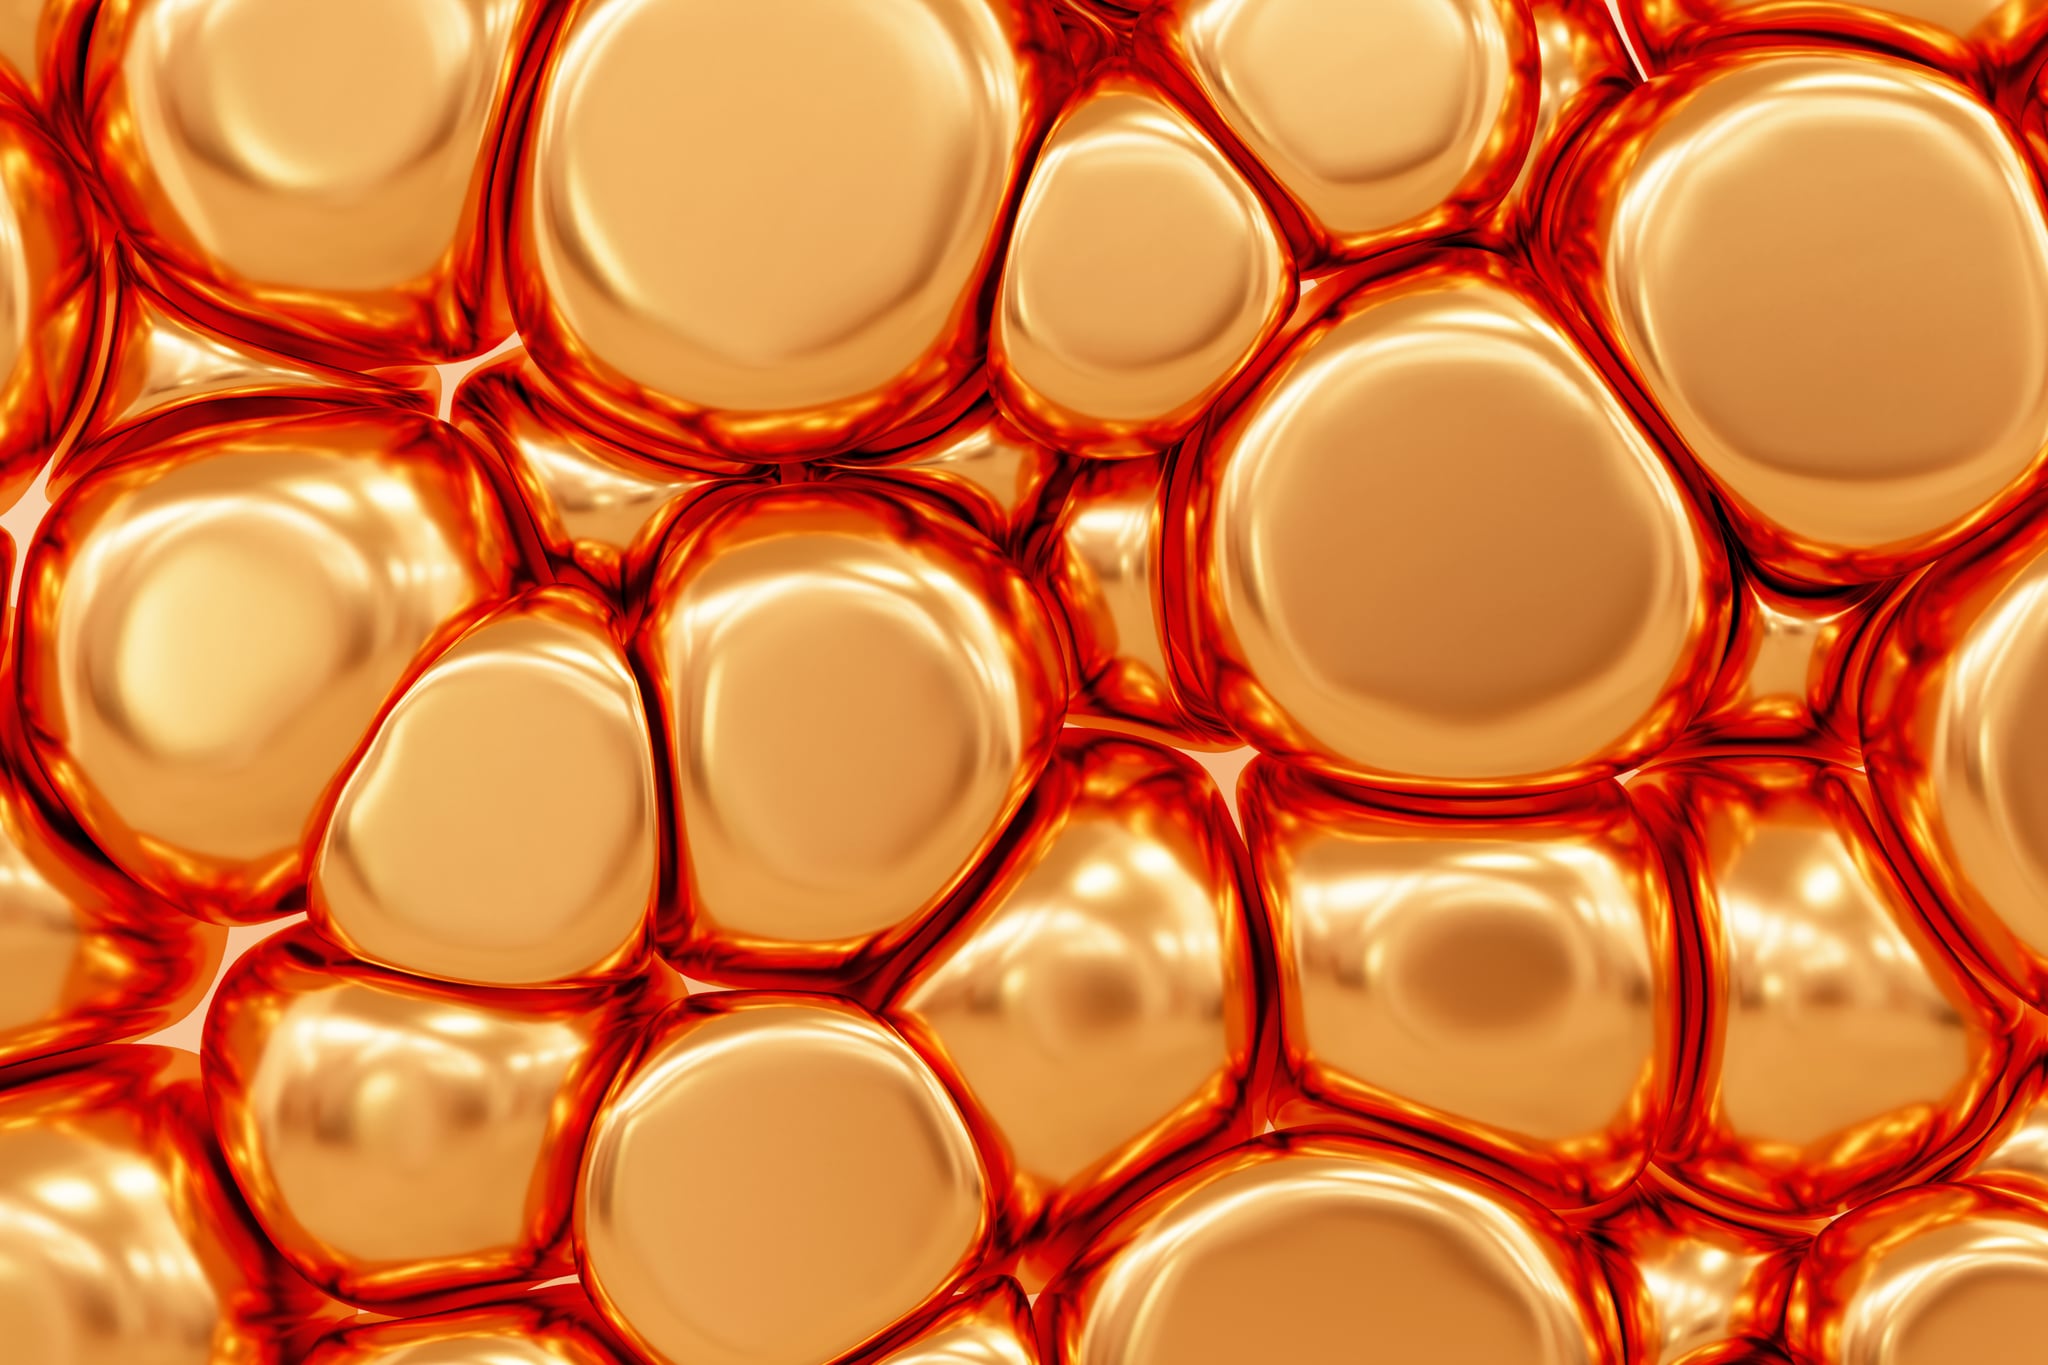 Glossy liquid gold bubbles, drops, blobs background. Abstract futuristic 3D pattern, composition. Design element.